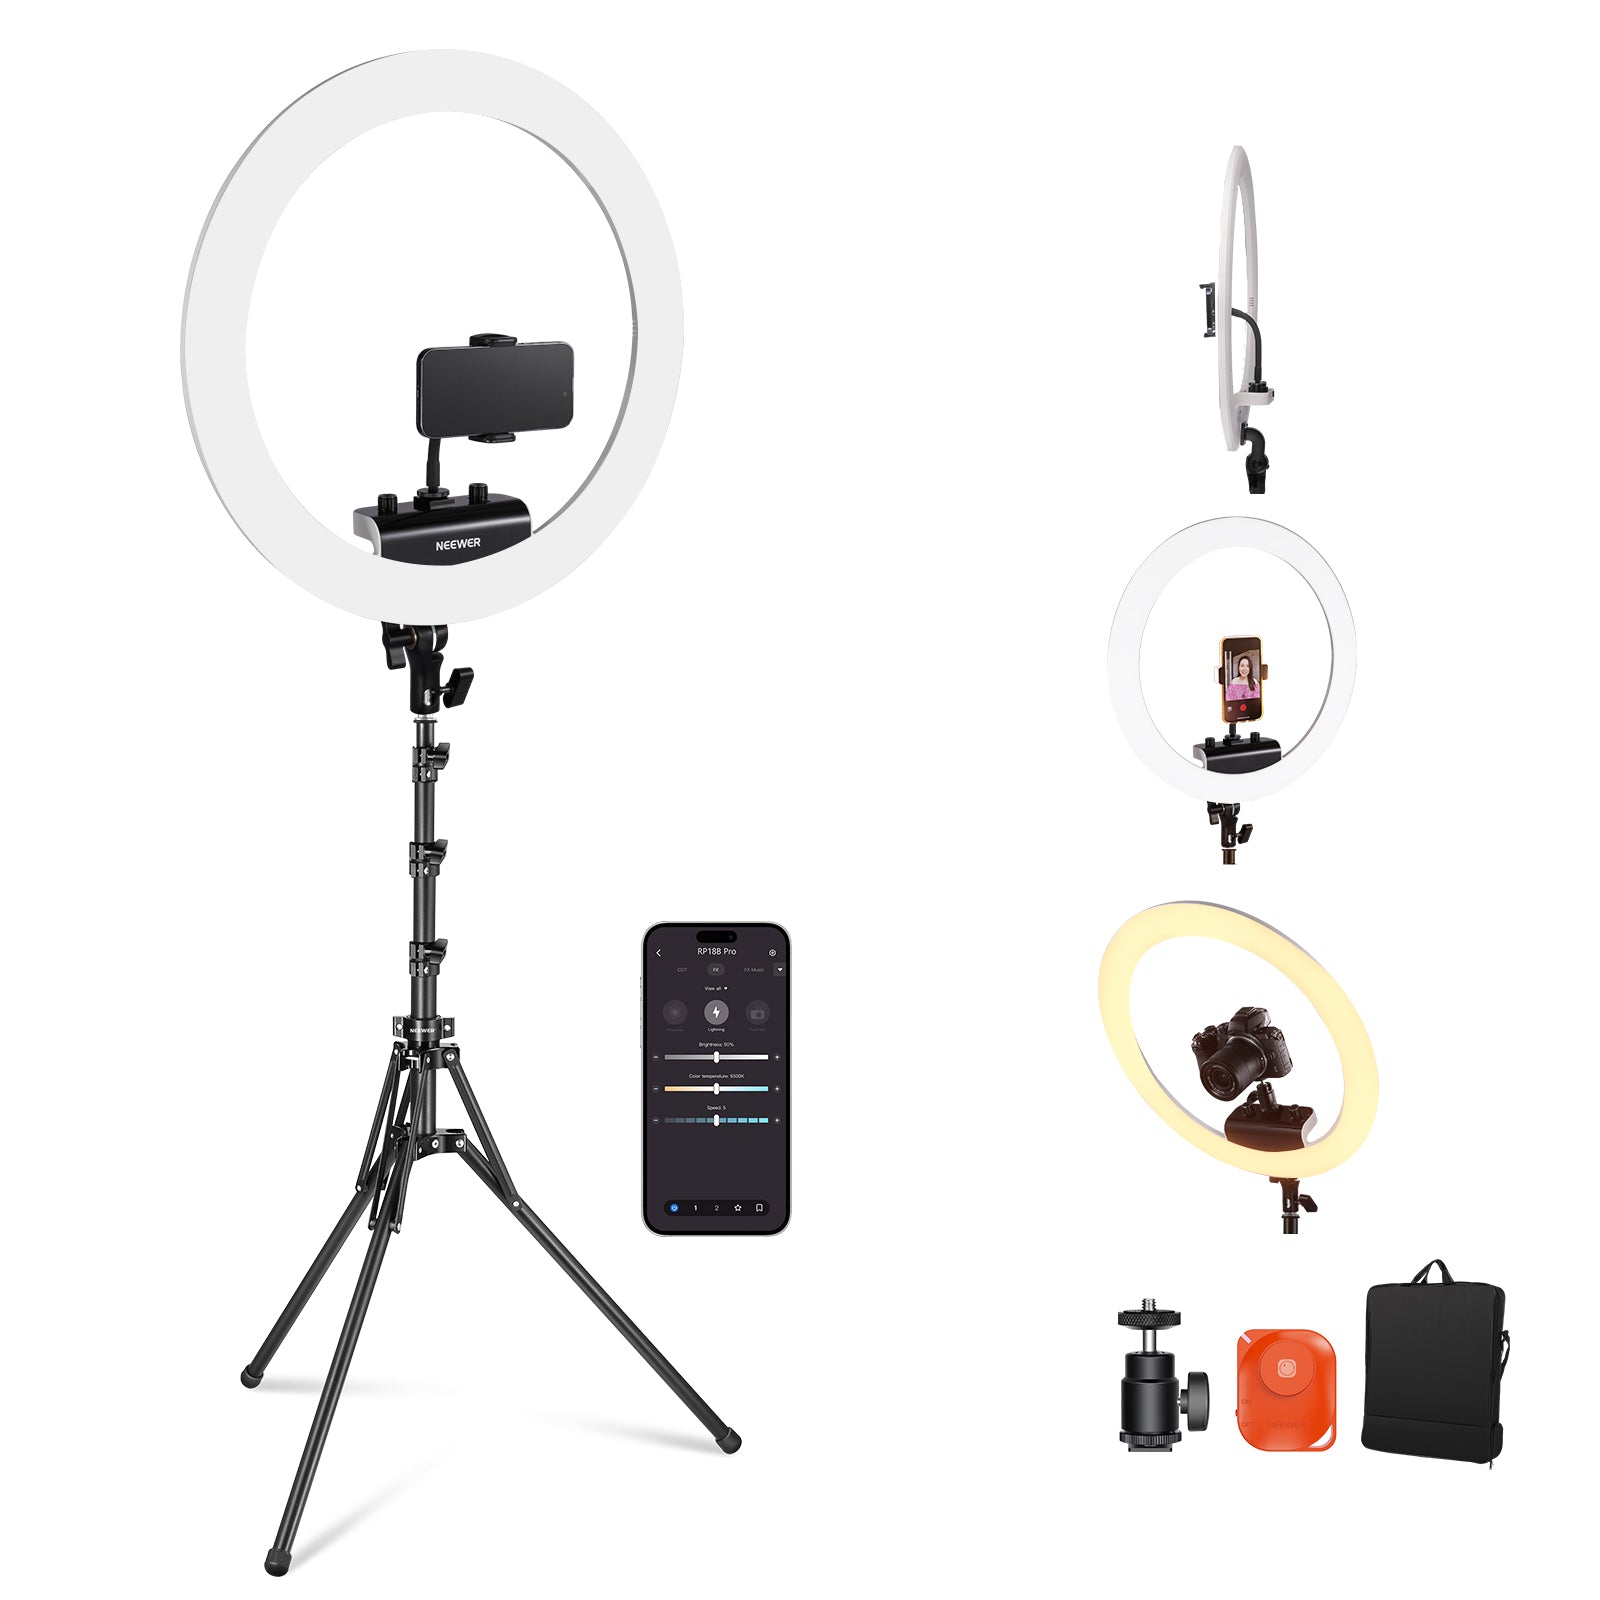 NEEWER SRP18-2.4G Advanced Remote 18-inch LED Ring Light Manual